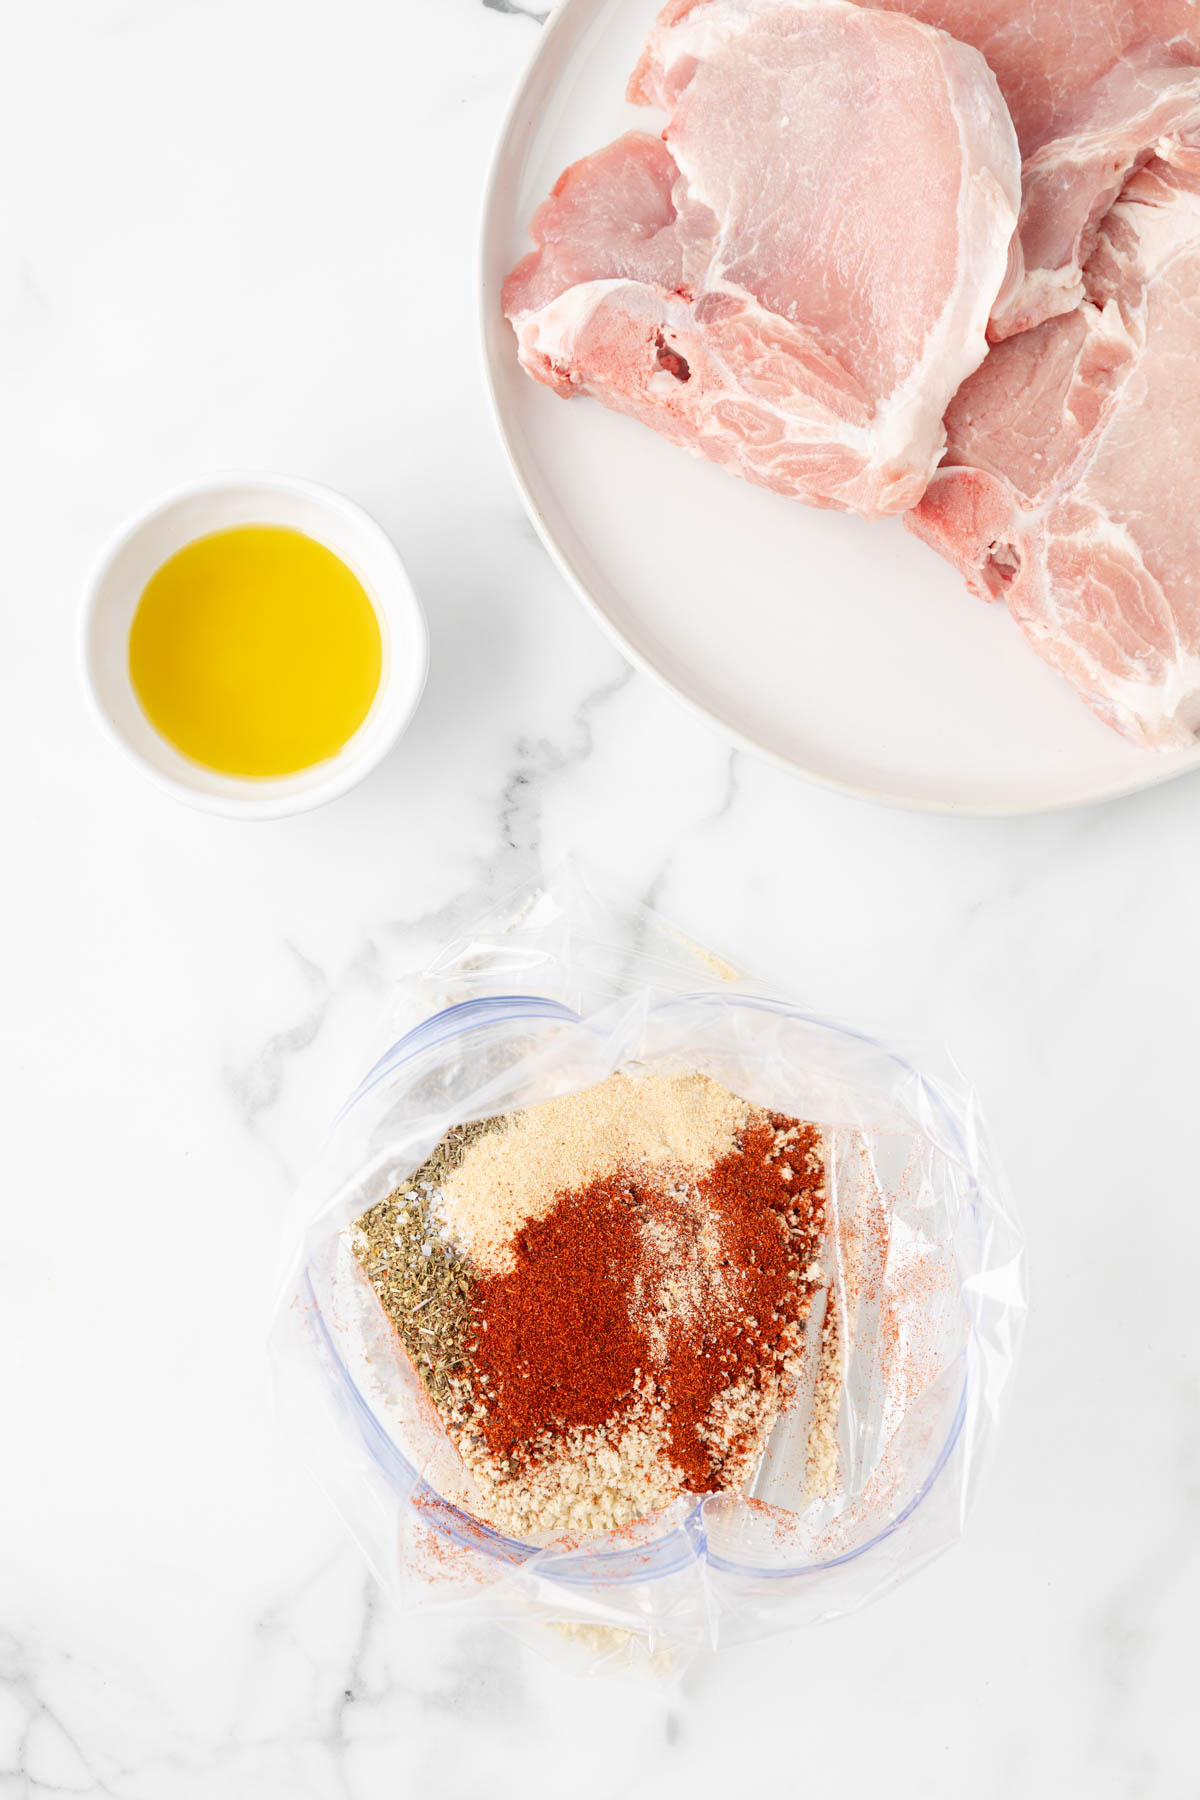 Spices are layered on top of a bag filled with panko breadcrumbs, displayed near a plate of uncooked pork chops and a small bowl of olive oil. 